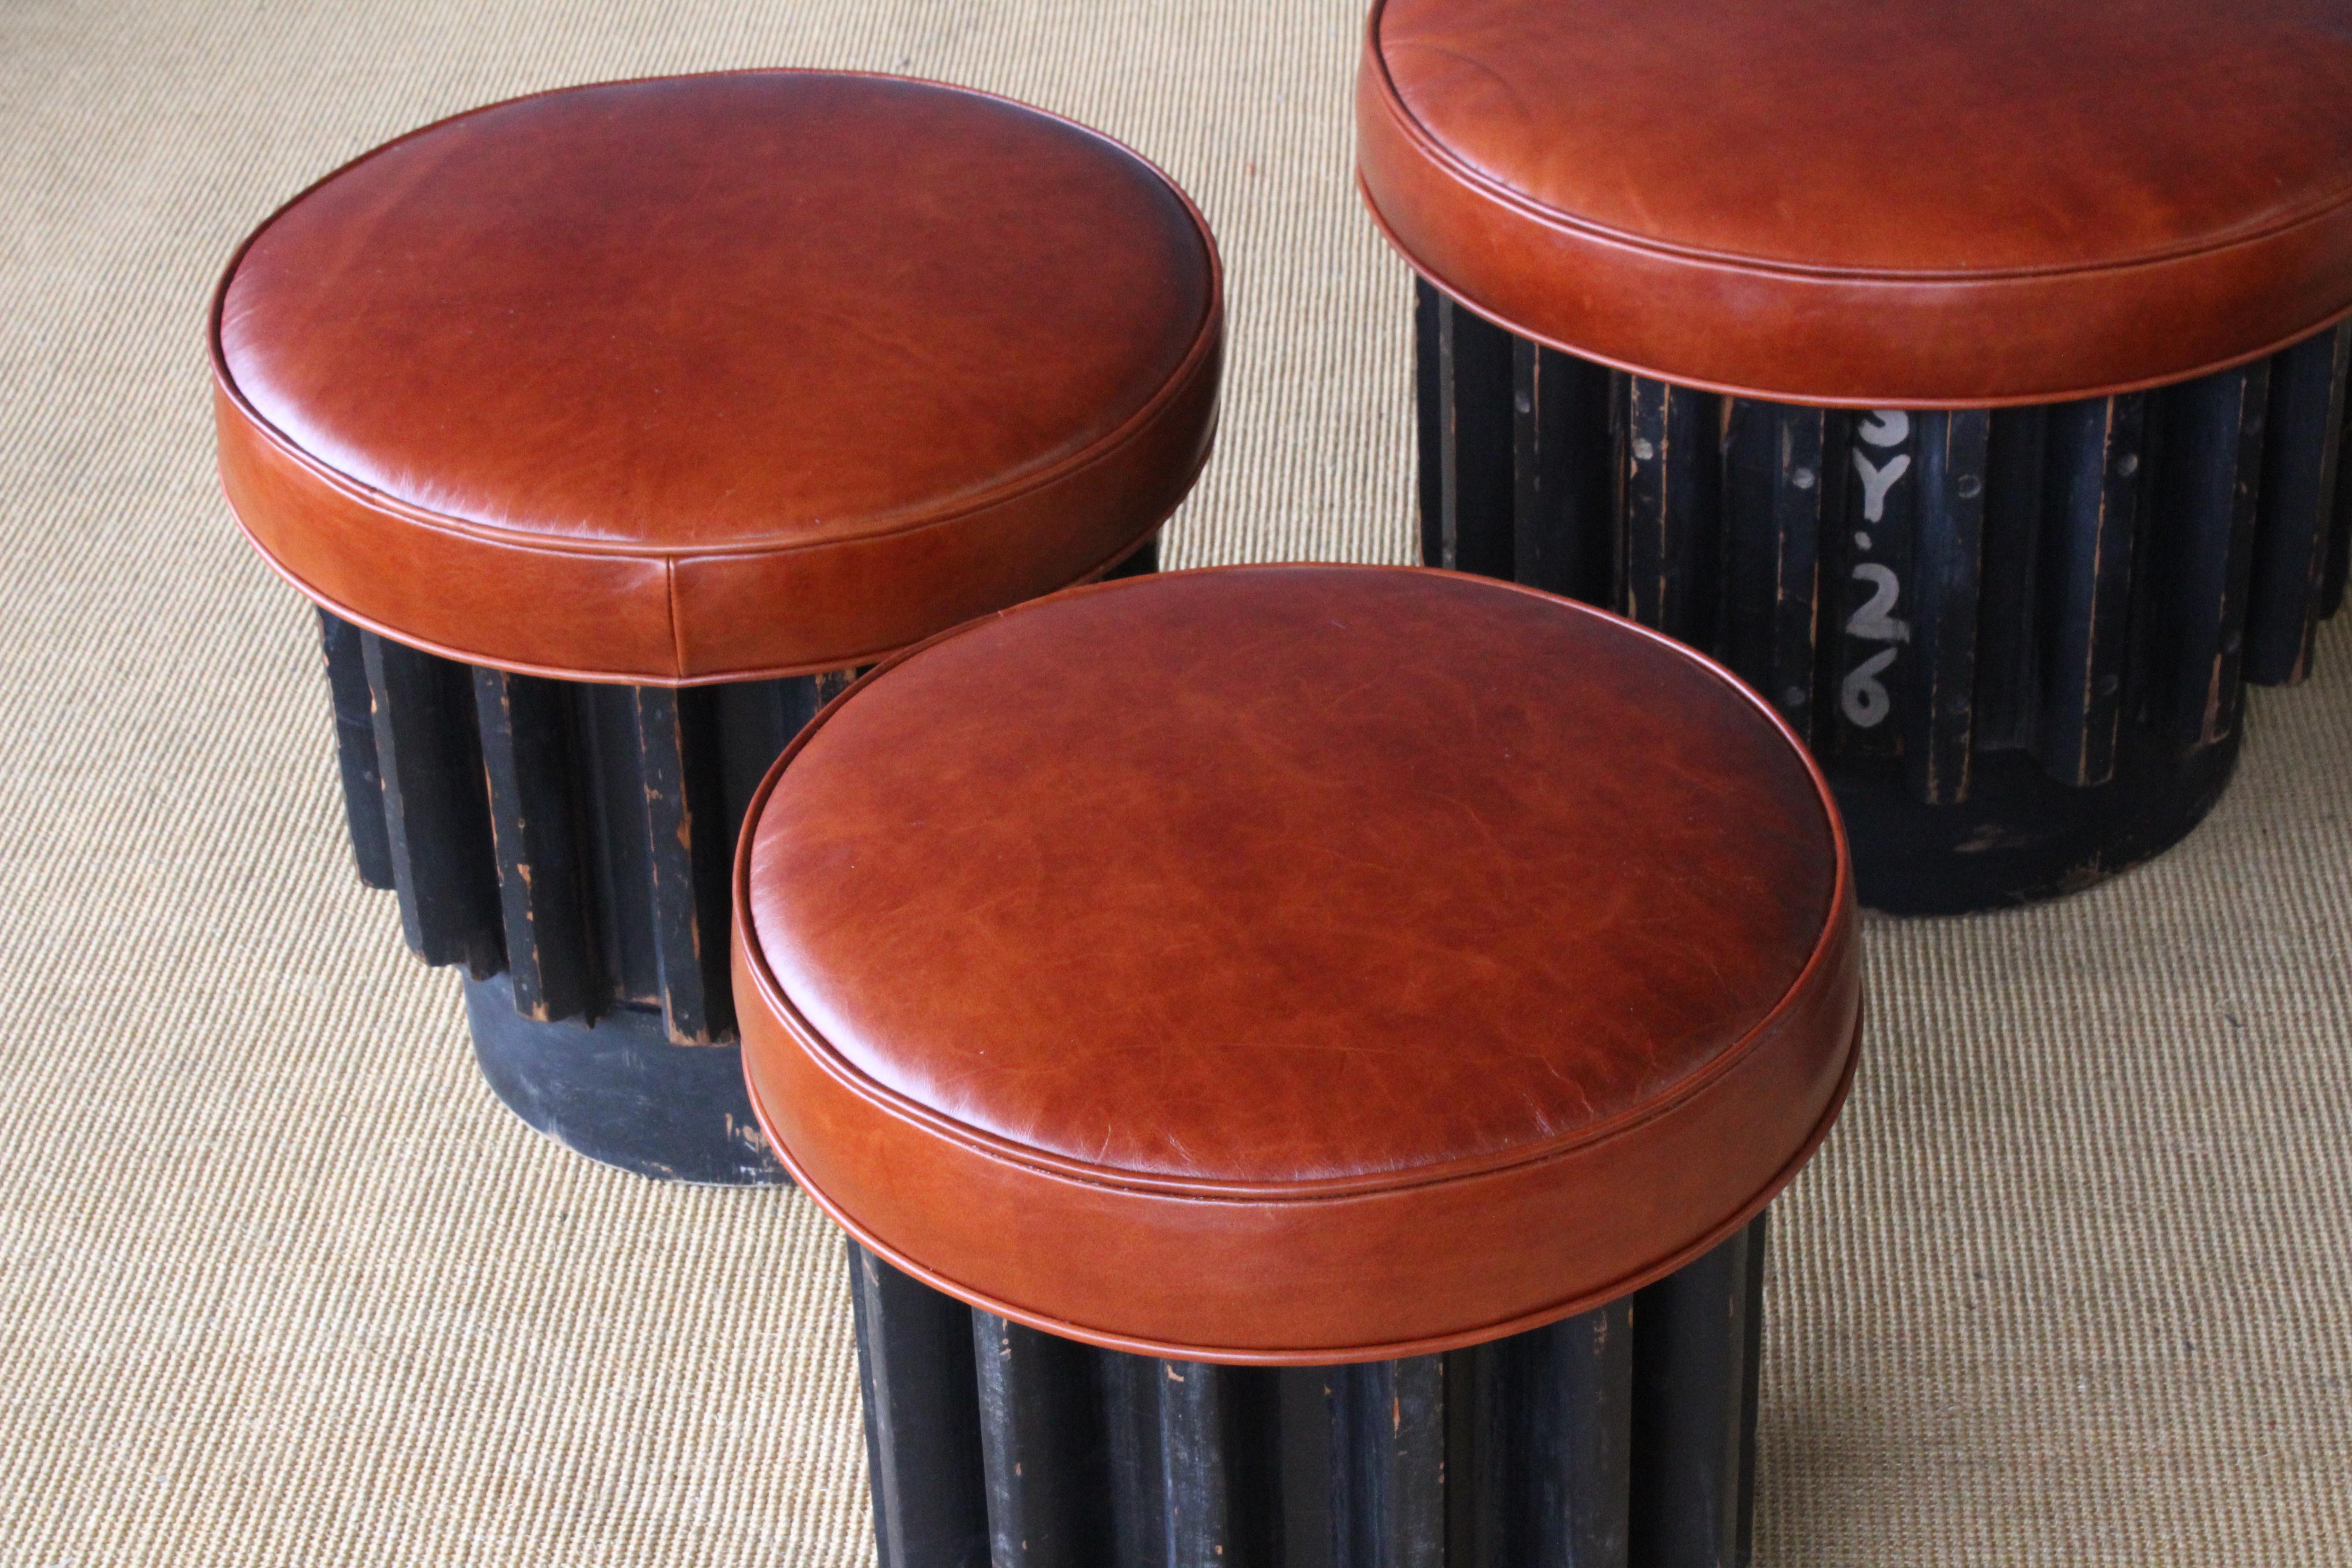 Industrial gear molds, originally from a gear factory from Los Angeles, re-purposed and made into custom stools. Original black painted finish to each stool with age appropriate signs of wear. Each stool has new leather upholstery. Sizes vary, two